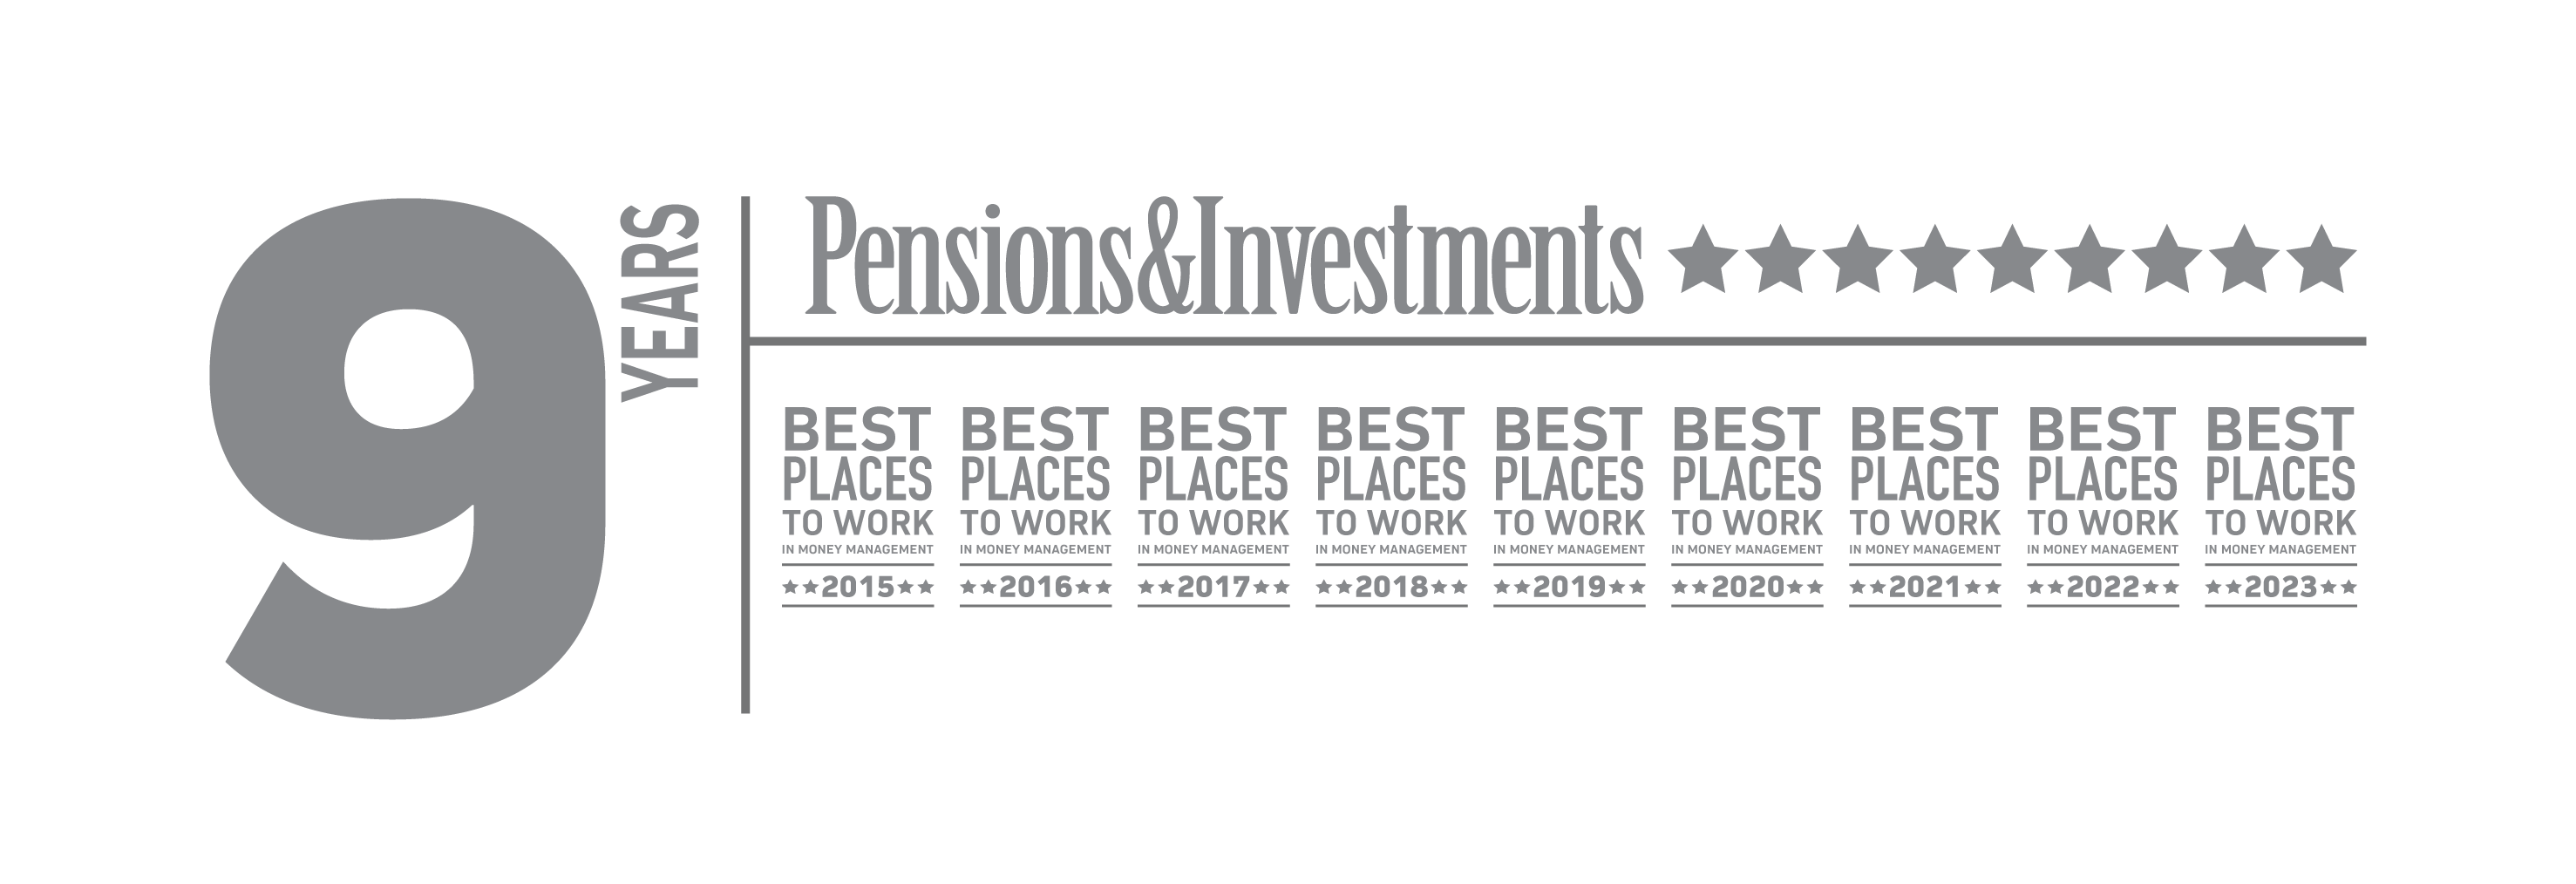 9 Years pensions and Investments